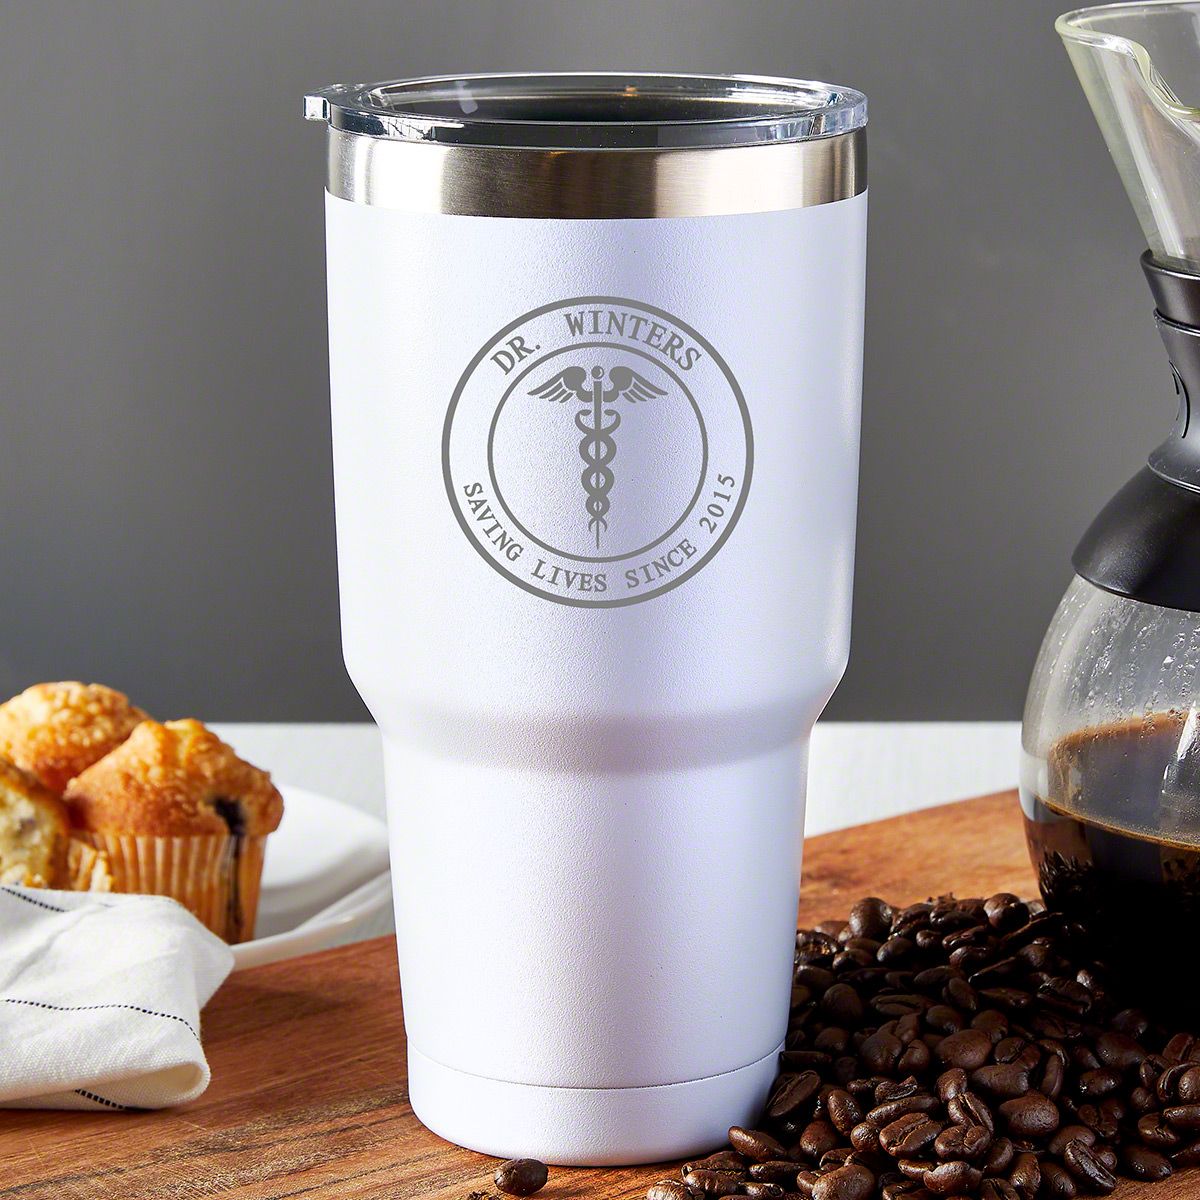 https://images.homewetbar.com/media/catalog/product/e/n/engraved-doctor-gift-white-insulated-tumbler-medical-arts-p-10485.jpg?store=default&image-type=image